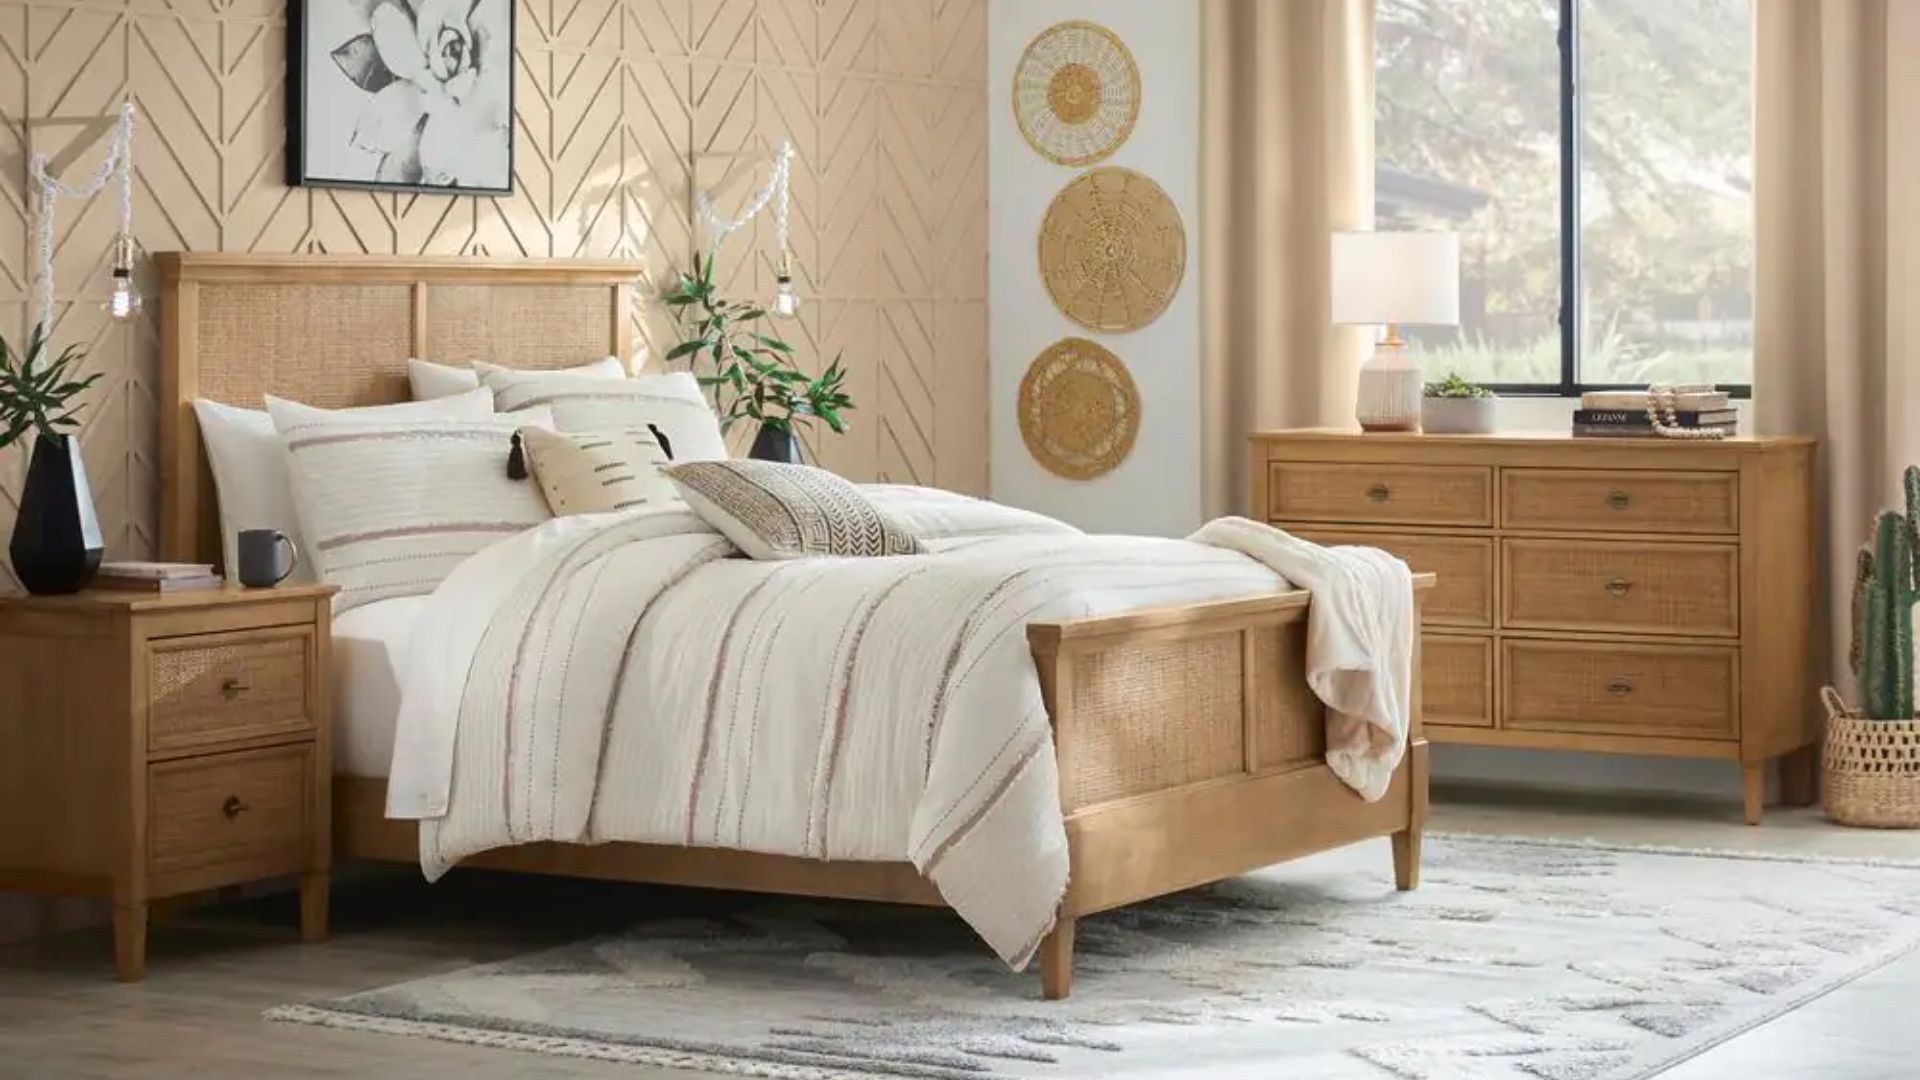 besat place to by bedroom furniture online